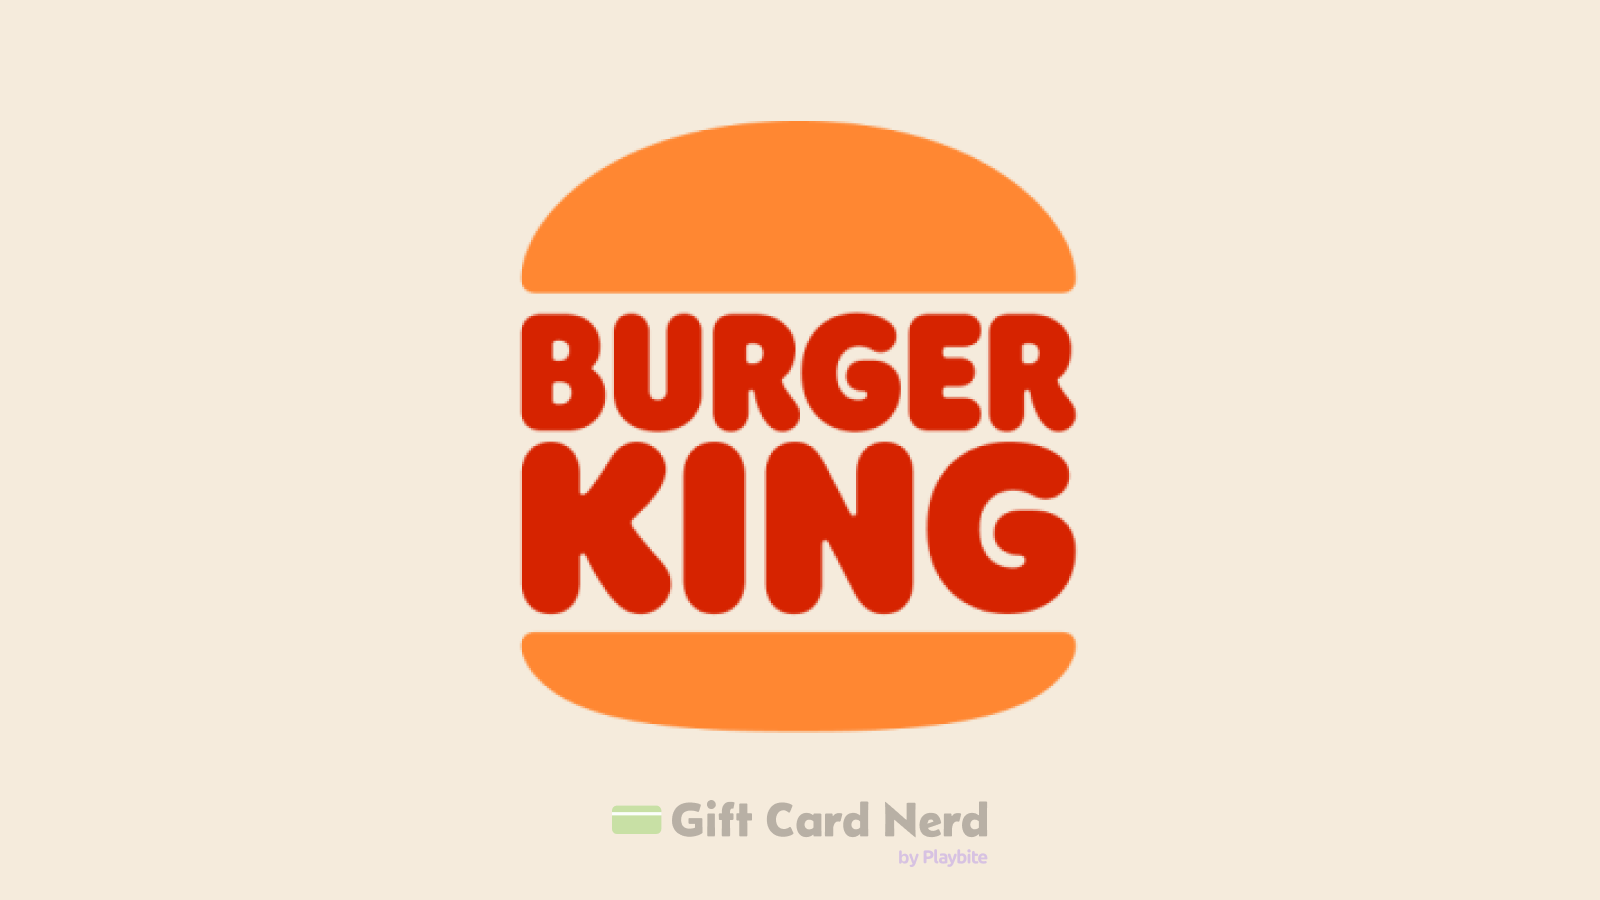 Can I Use a Burger King Gift Card on Apple Wallet?